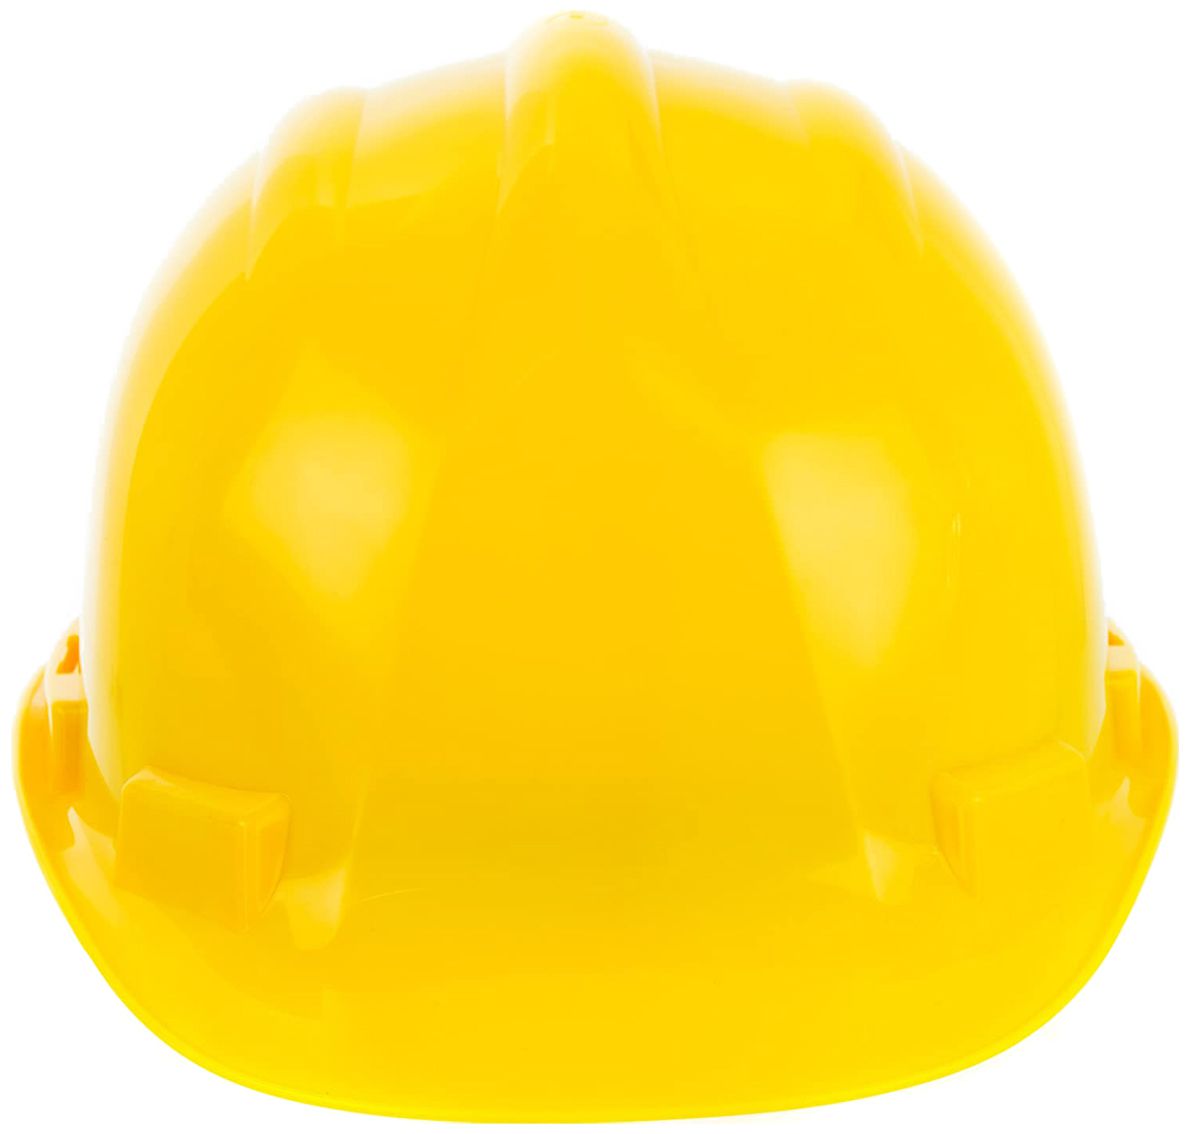 REIS UNIVER construction helmet - robust safety helmet for construction & industry - EN 397 - with 4-point suspension - yellow